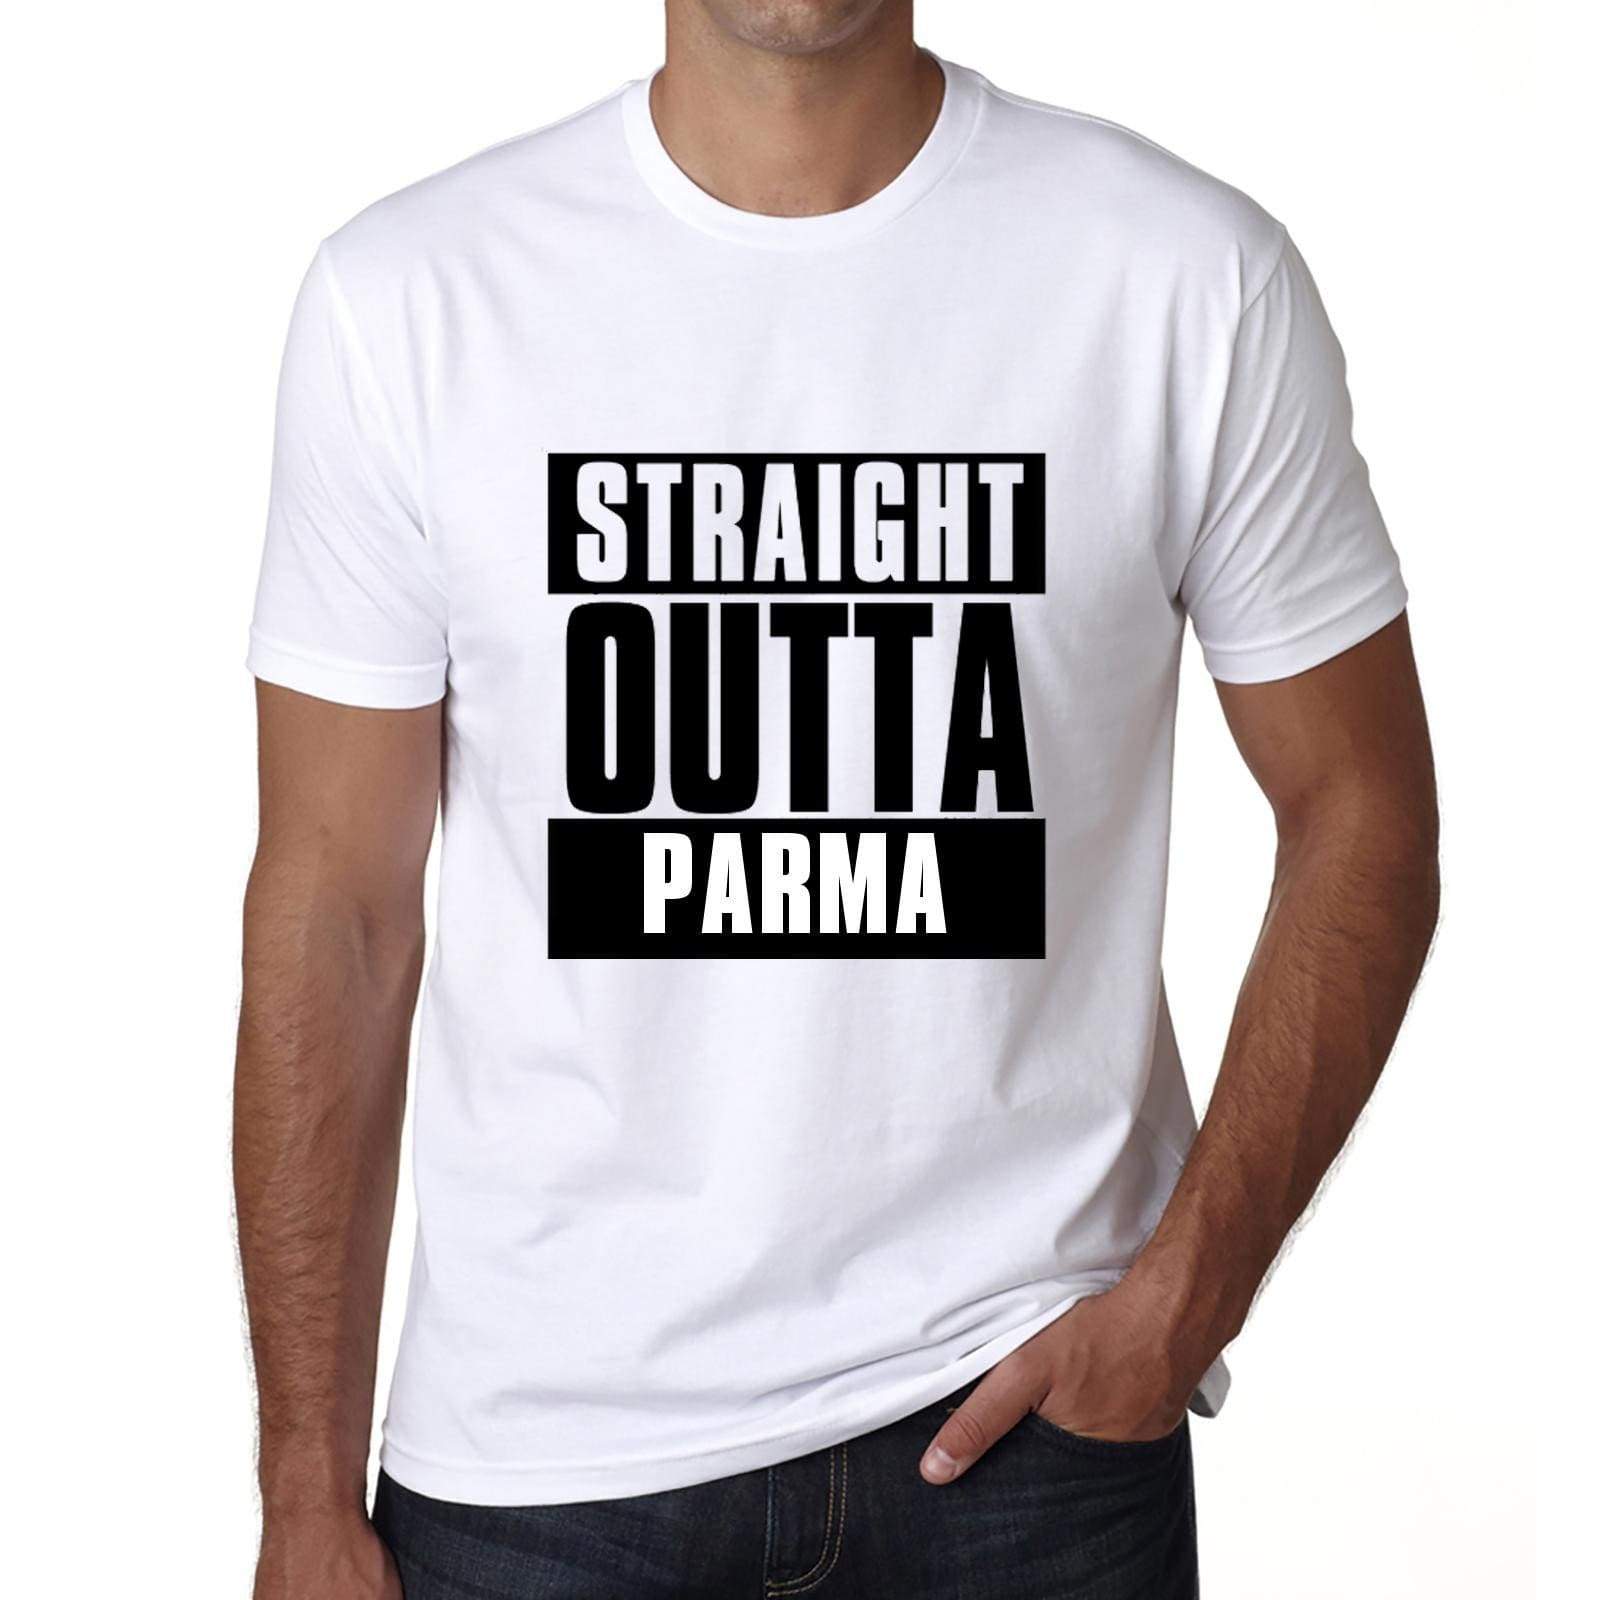 Straight Outta Parma Mens Short Sleeve Round Neck T-Shirt 00027 - White / S - Casual